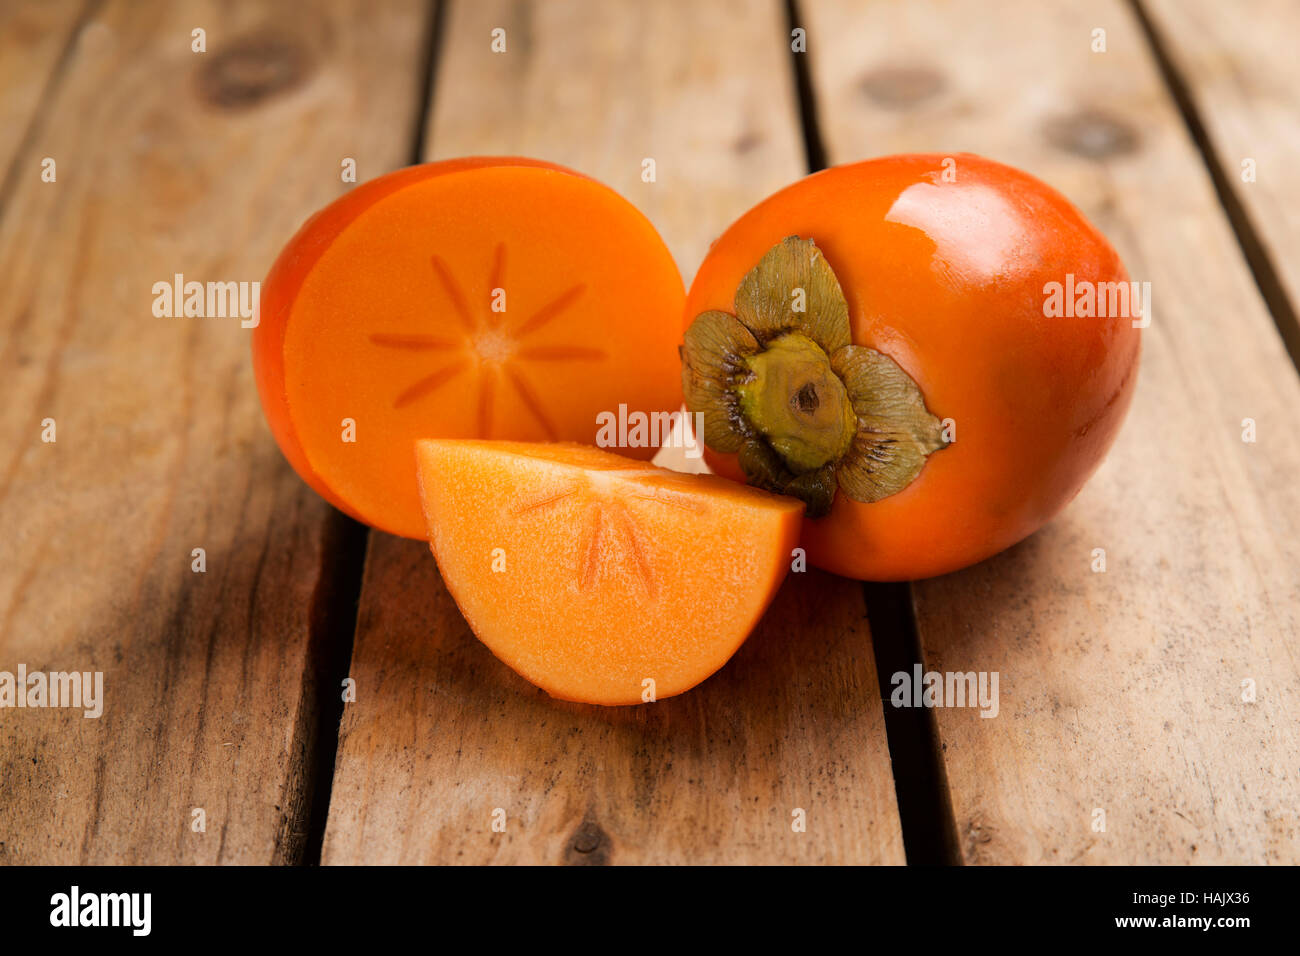 details persimmon fruit on rough wooden table Stock Photo